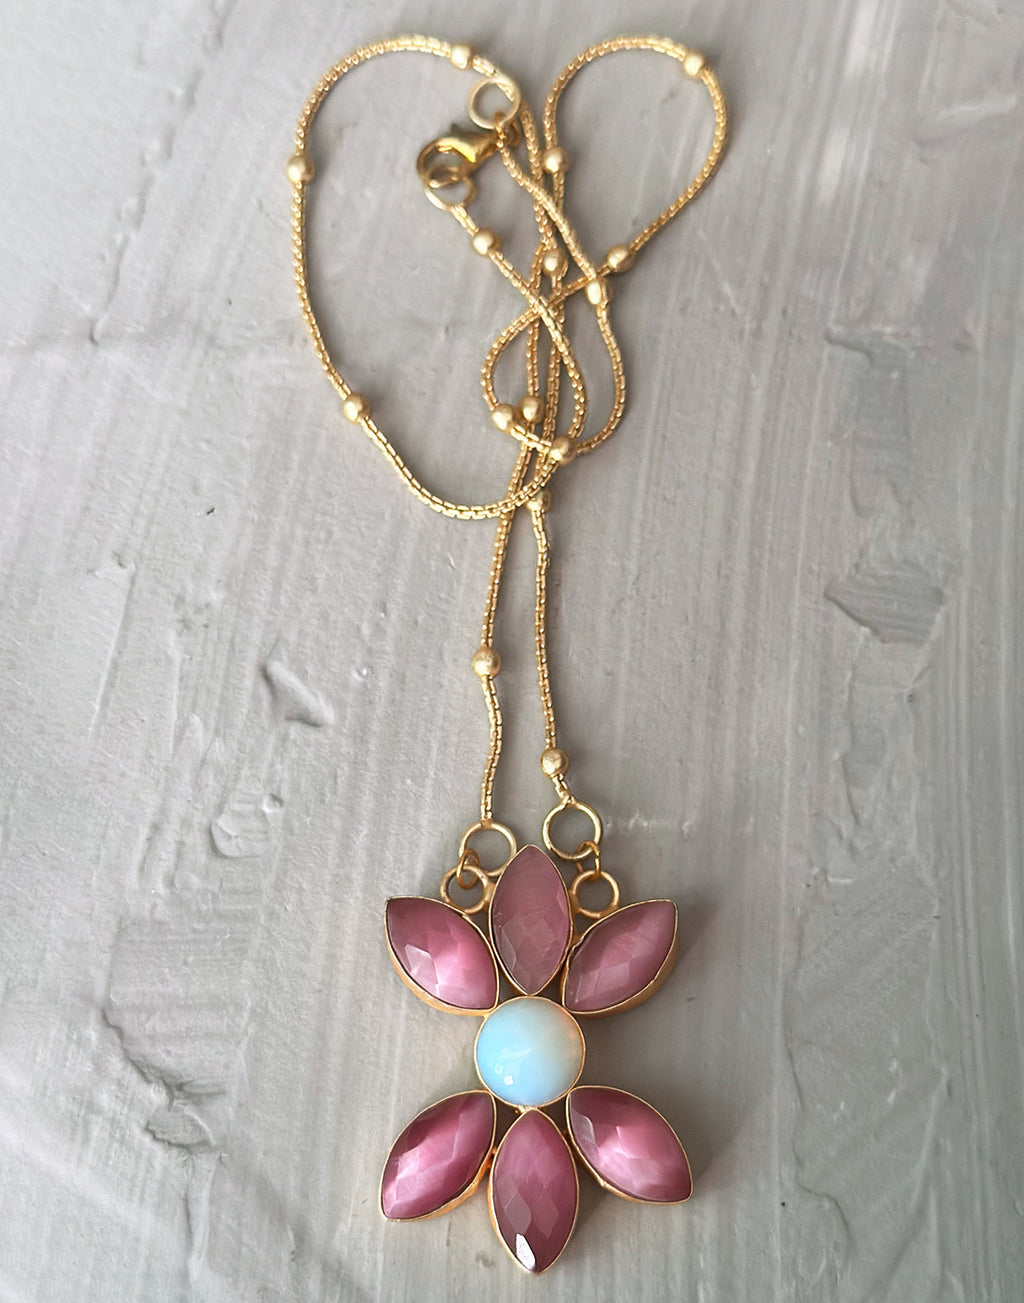 Pink Monalisa Flower Pendant Necklace - Statement Necklaces - Gold-Plated & Hypoallergenic Jewellery - Made in India - Dubai Jewellery - Dori